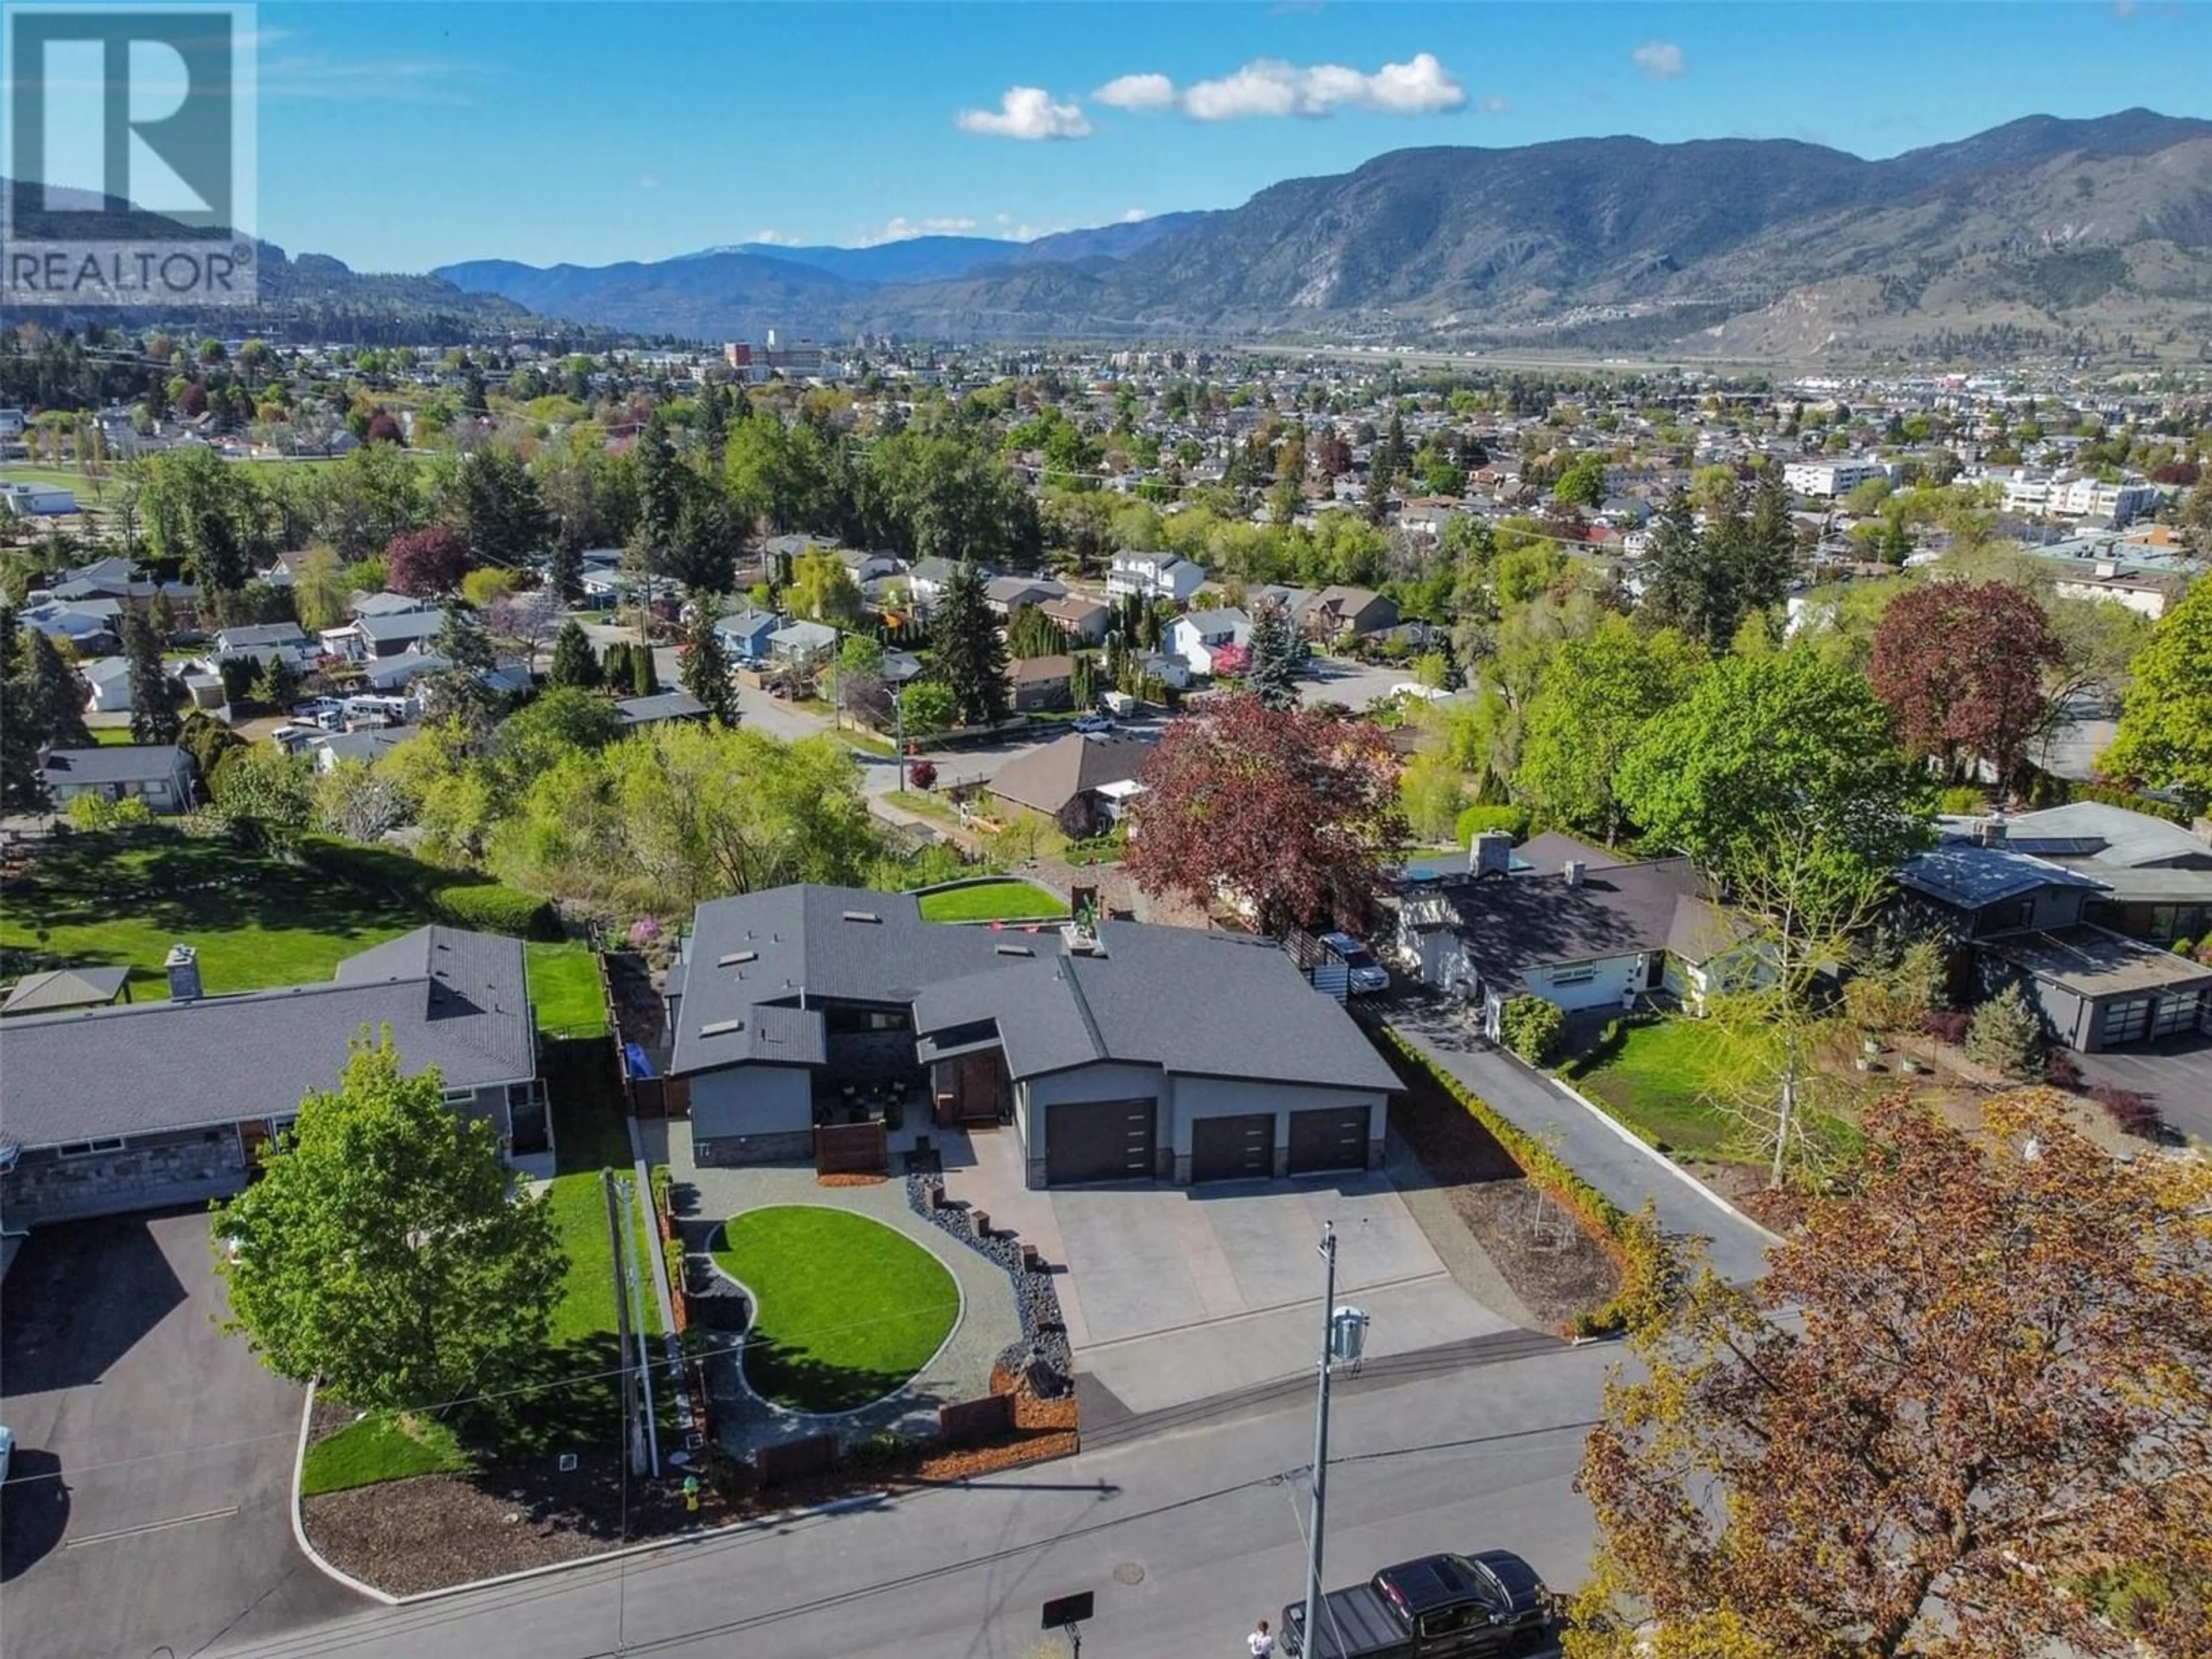 Lakeview for 1122 Redlands Road, Penticton British Columbia V2A1X4